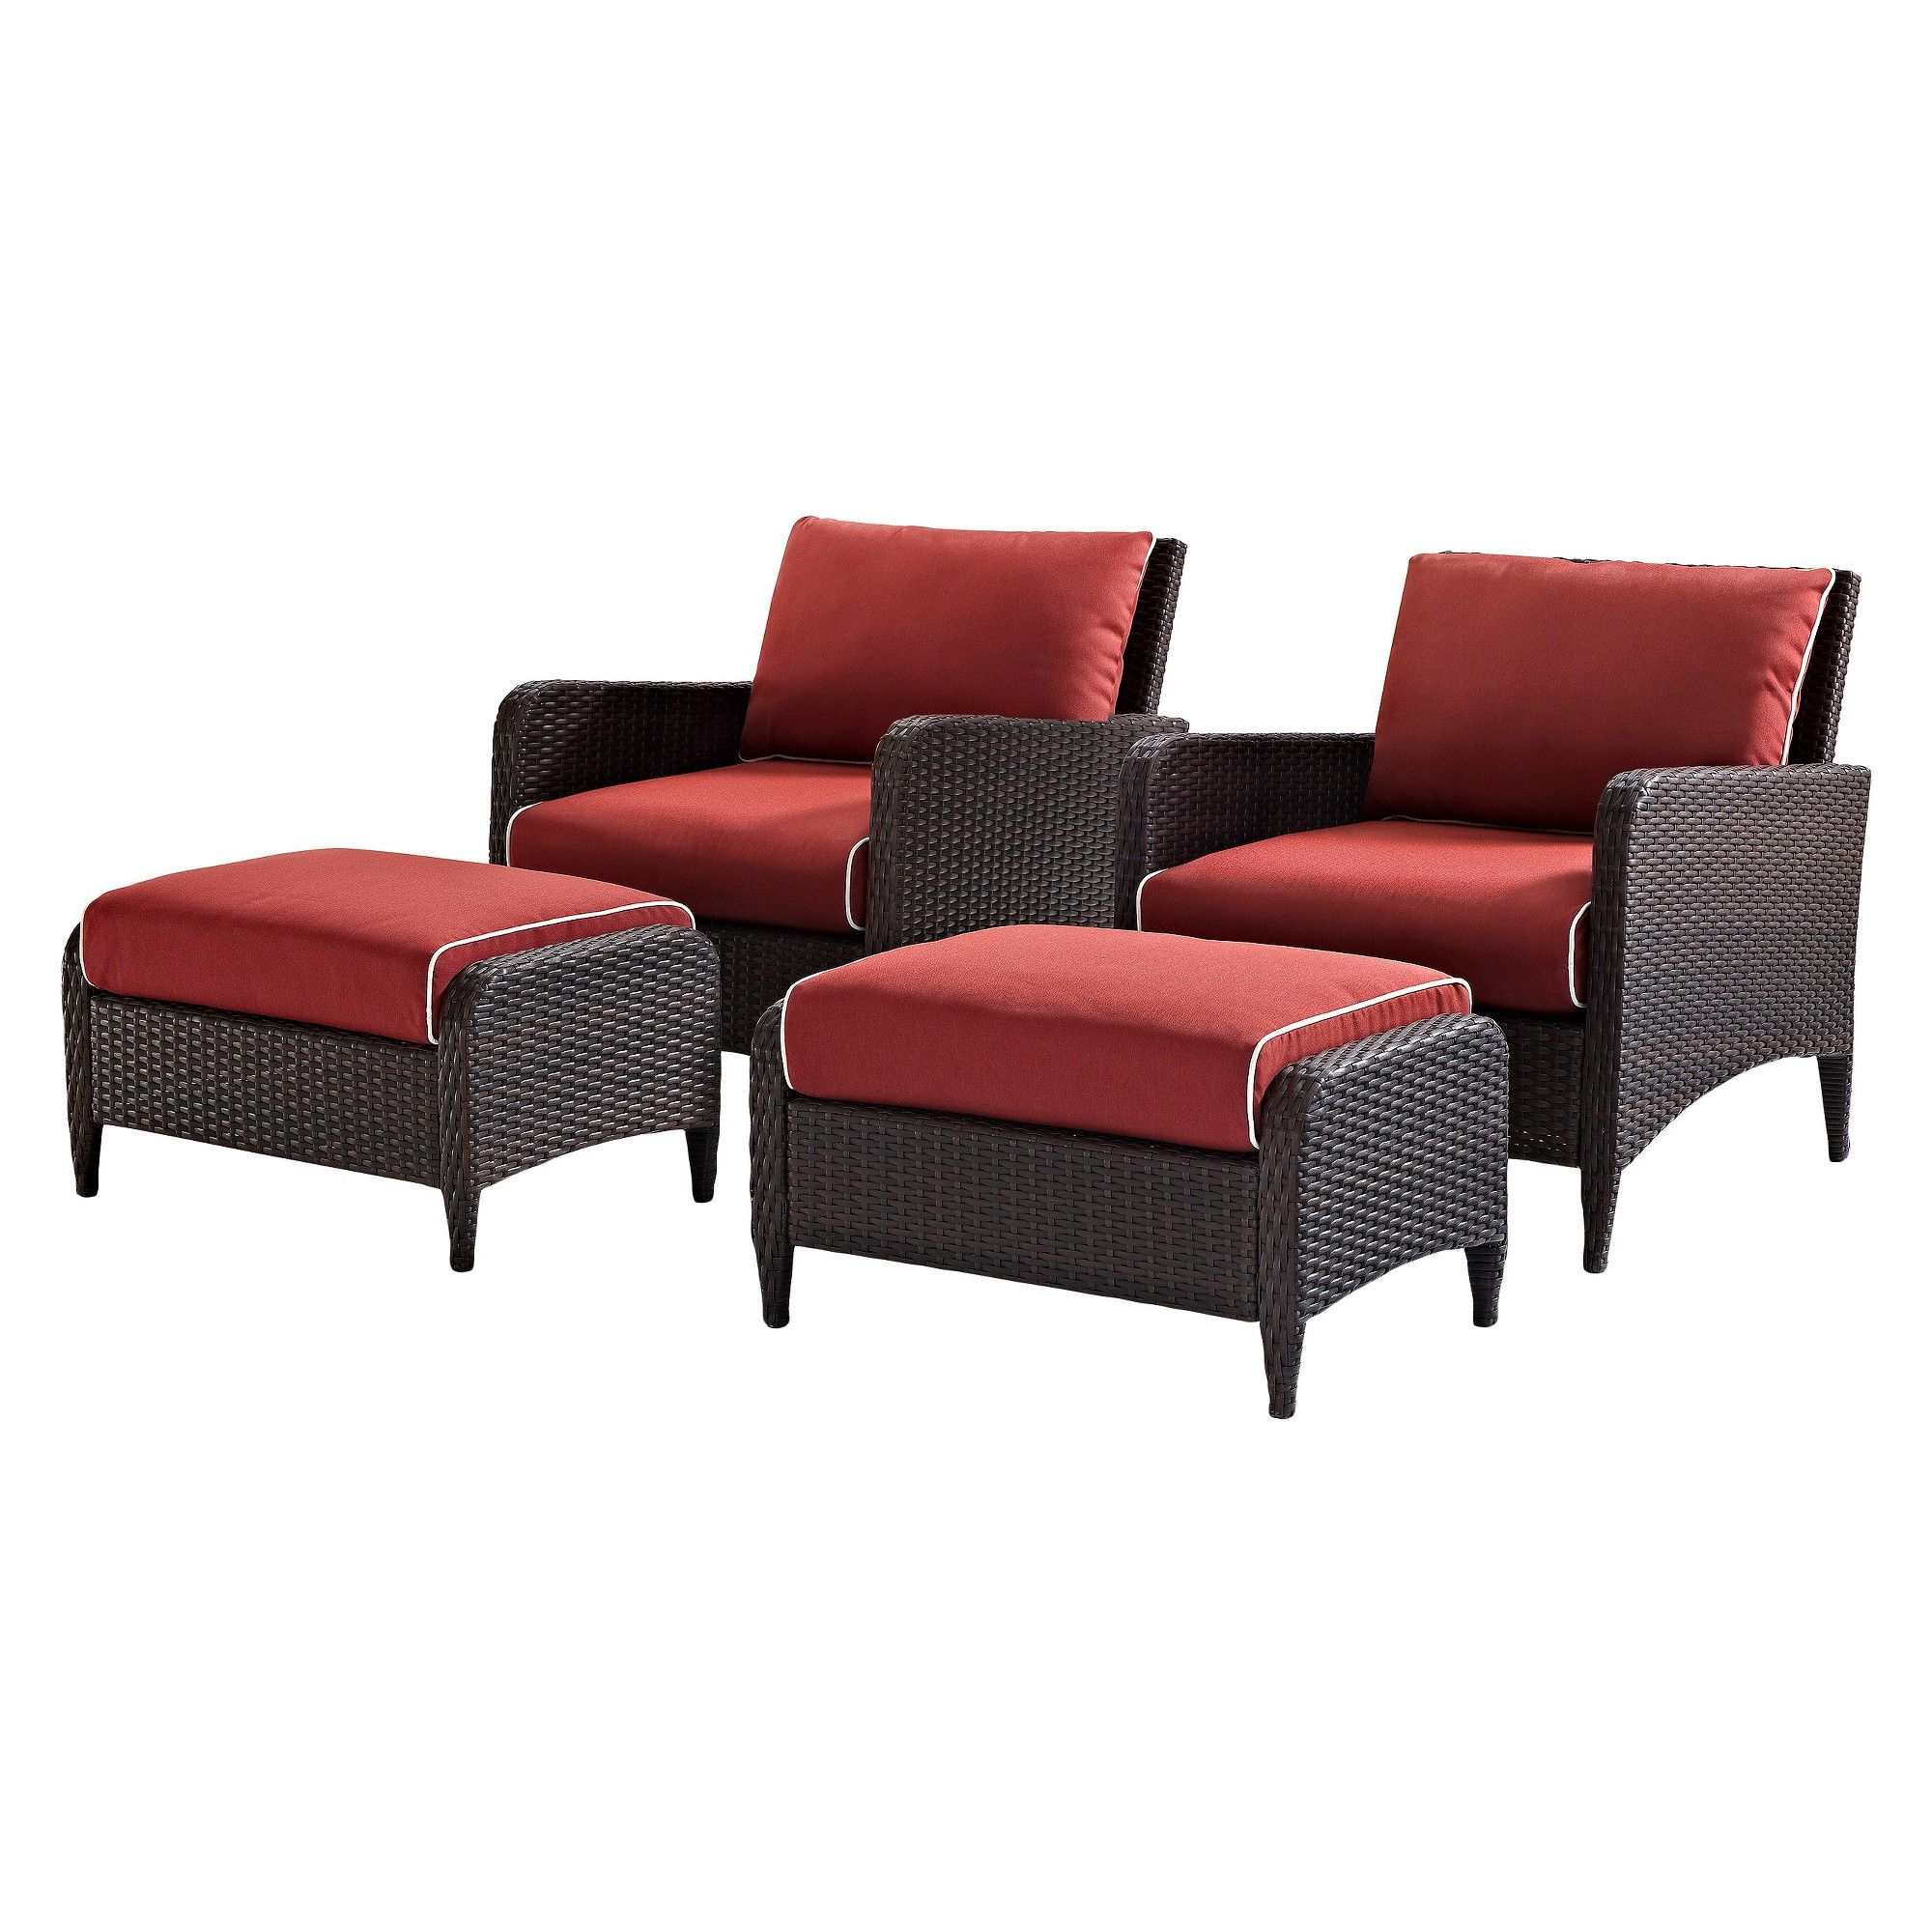 Crosley Kiawah 4 Piece Outdoor Wicker Seating Set With Sangria Cushions With Trendy 4 Piece Wicker Outdoor Seating Sets (View 10 of 15)